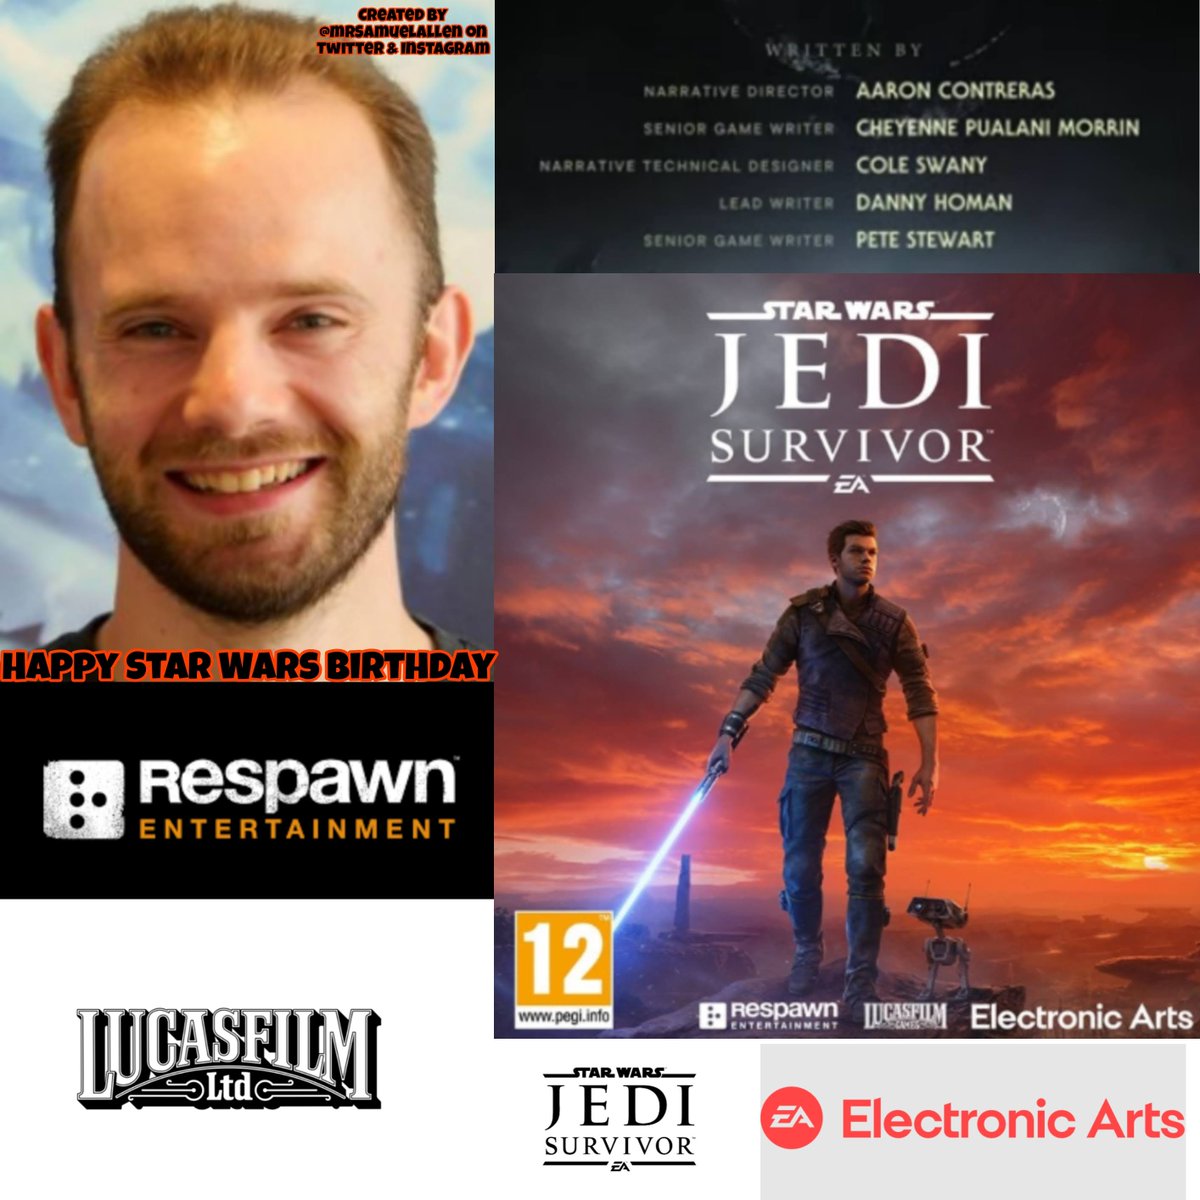 Happy Birthday to @Peter5tewart, he worked as a senior writer in video game #StarWarsJediSurvivor. May he have a good one.